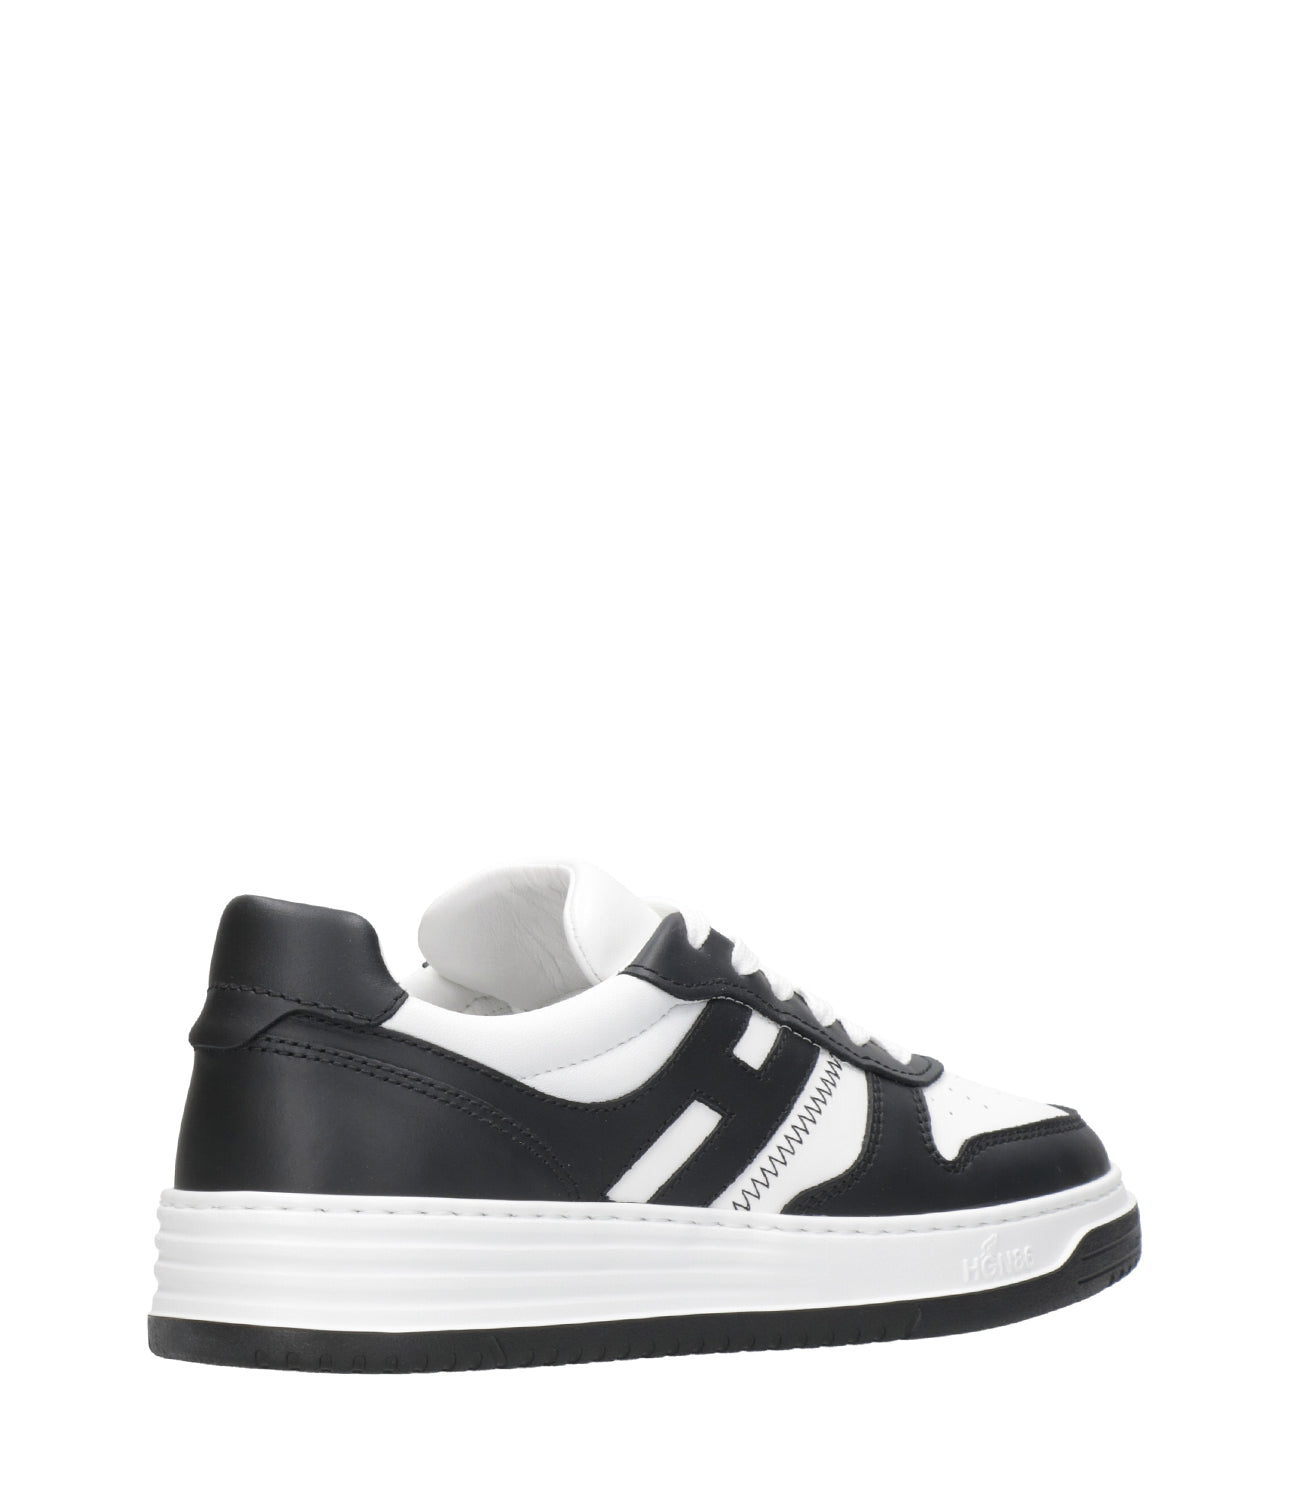 Hogan | Sneakers H60 Lace-up Black and White